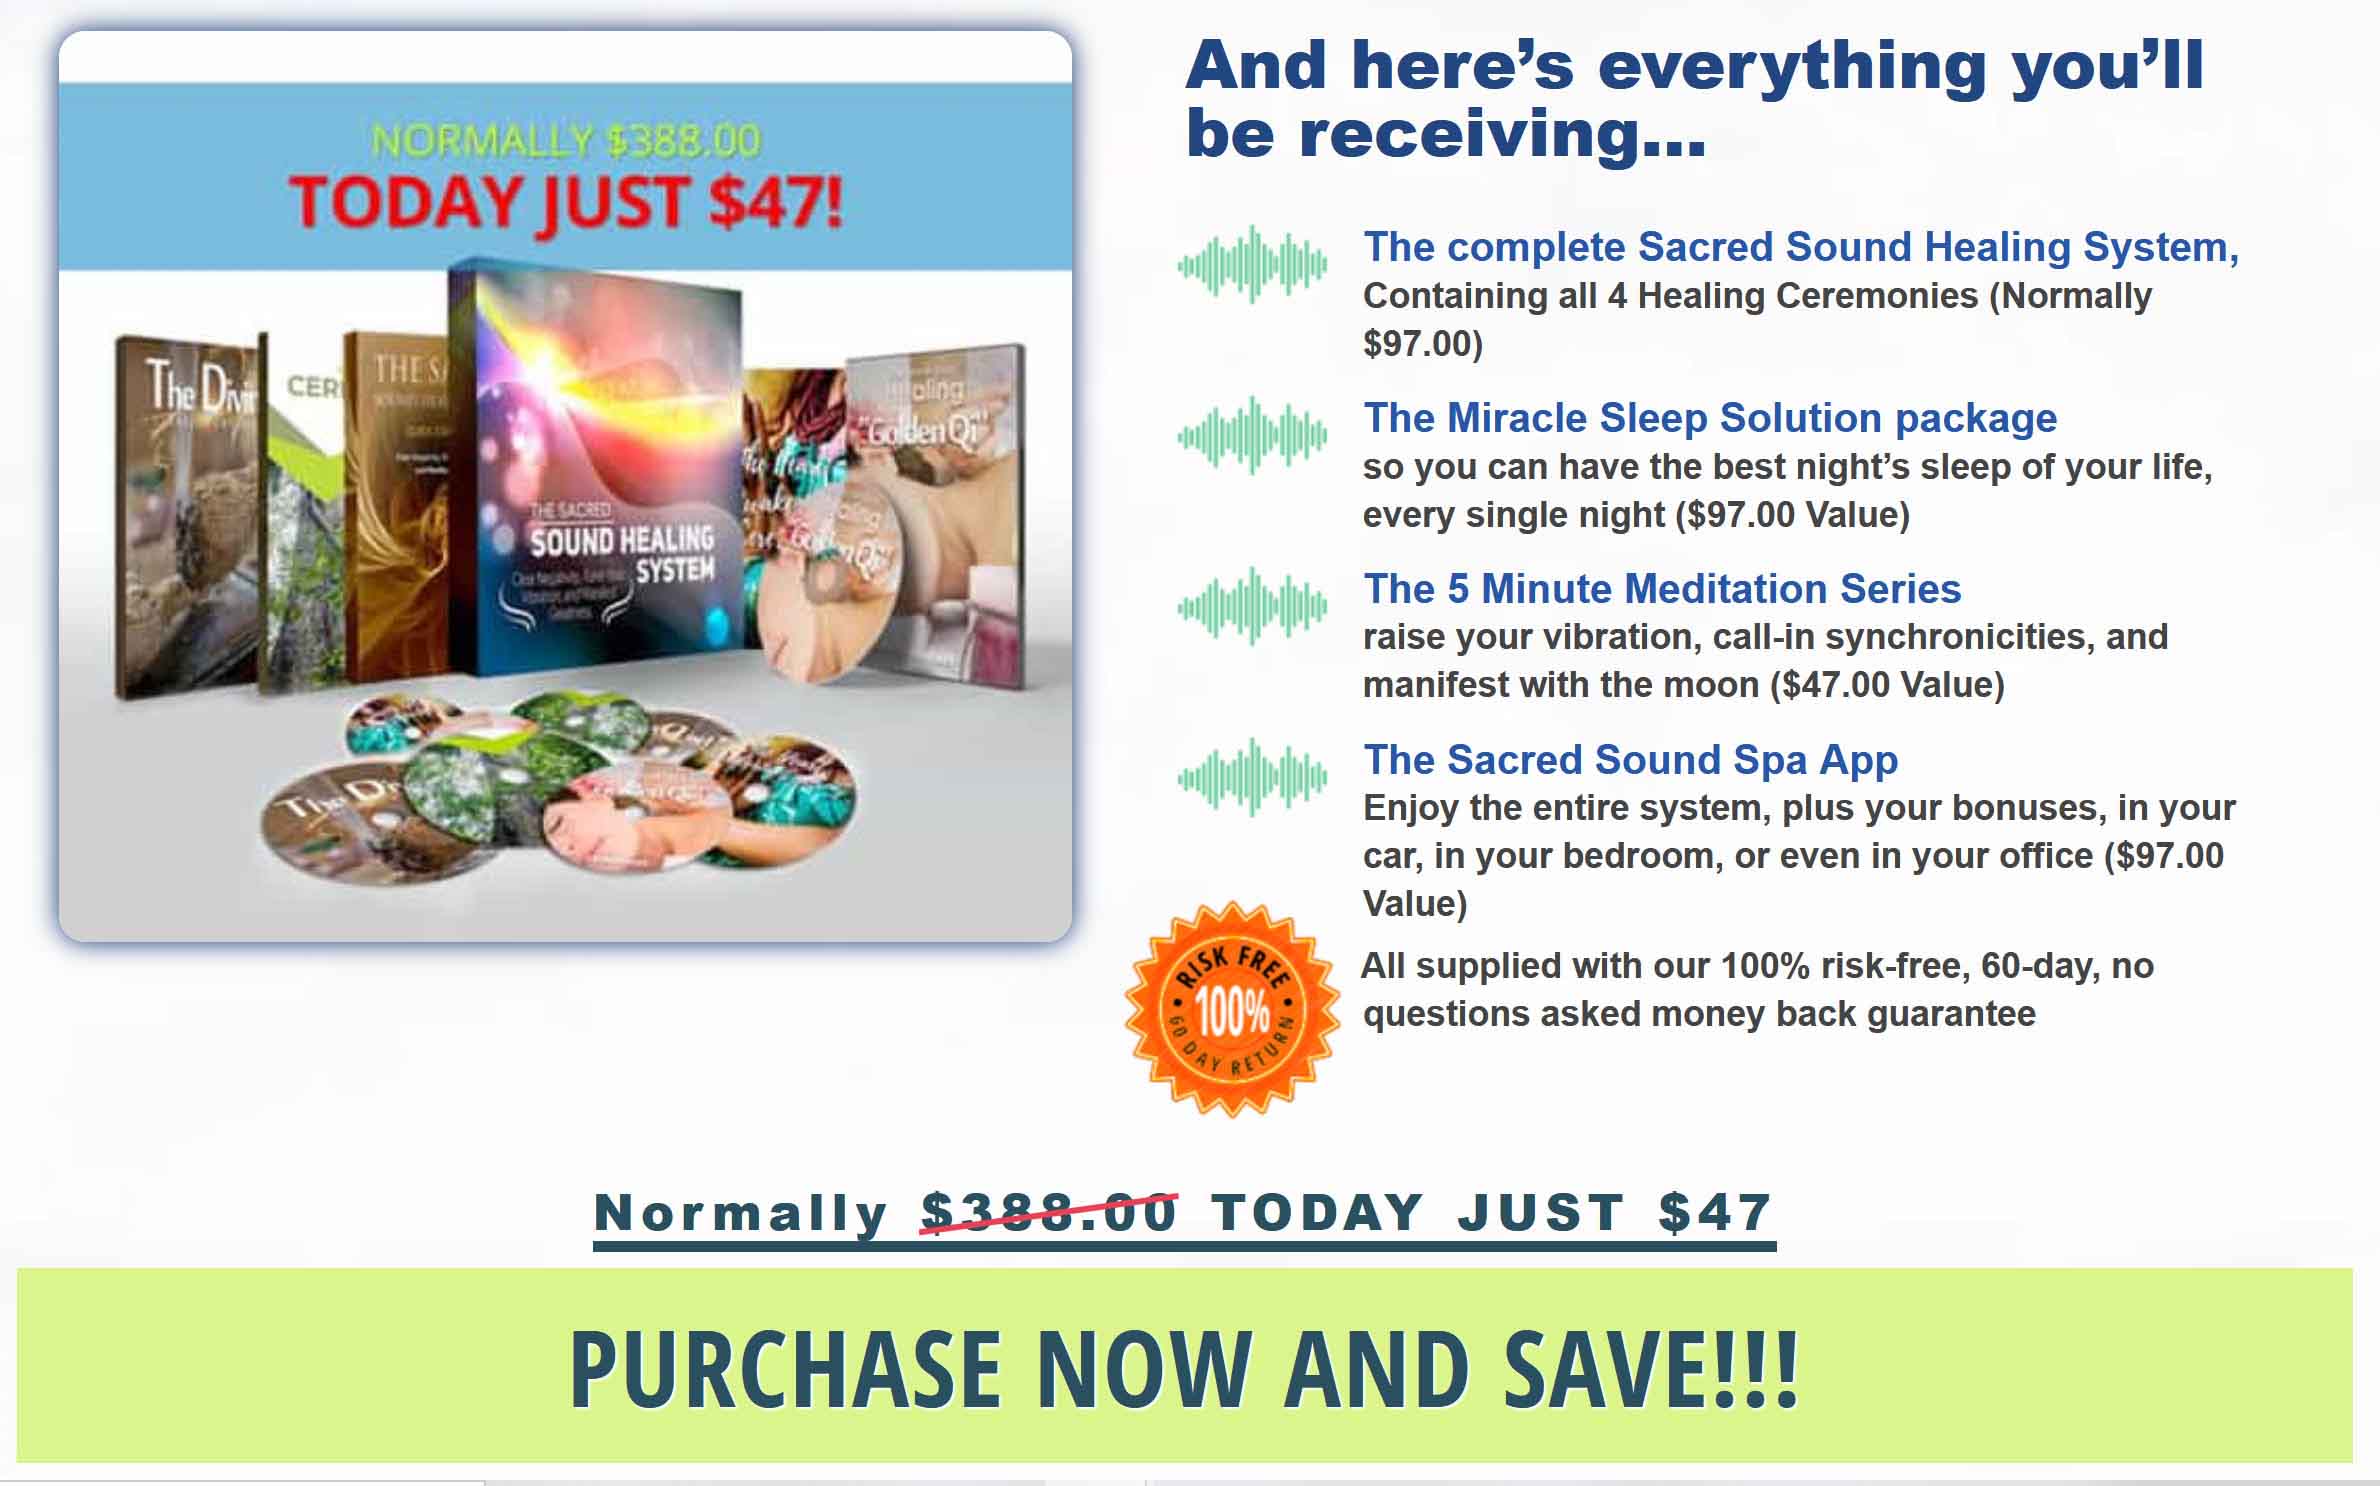 Get your copy of the Sacred Sound Healing System now.